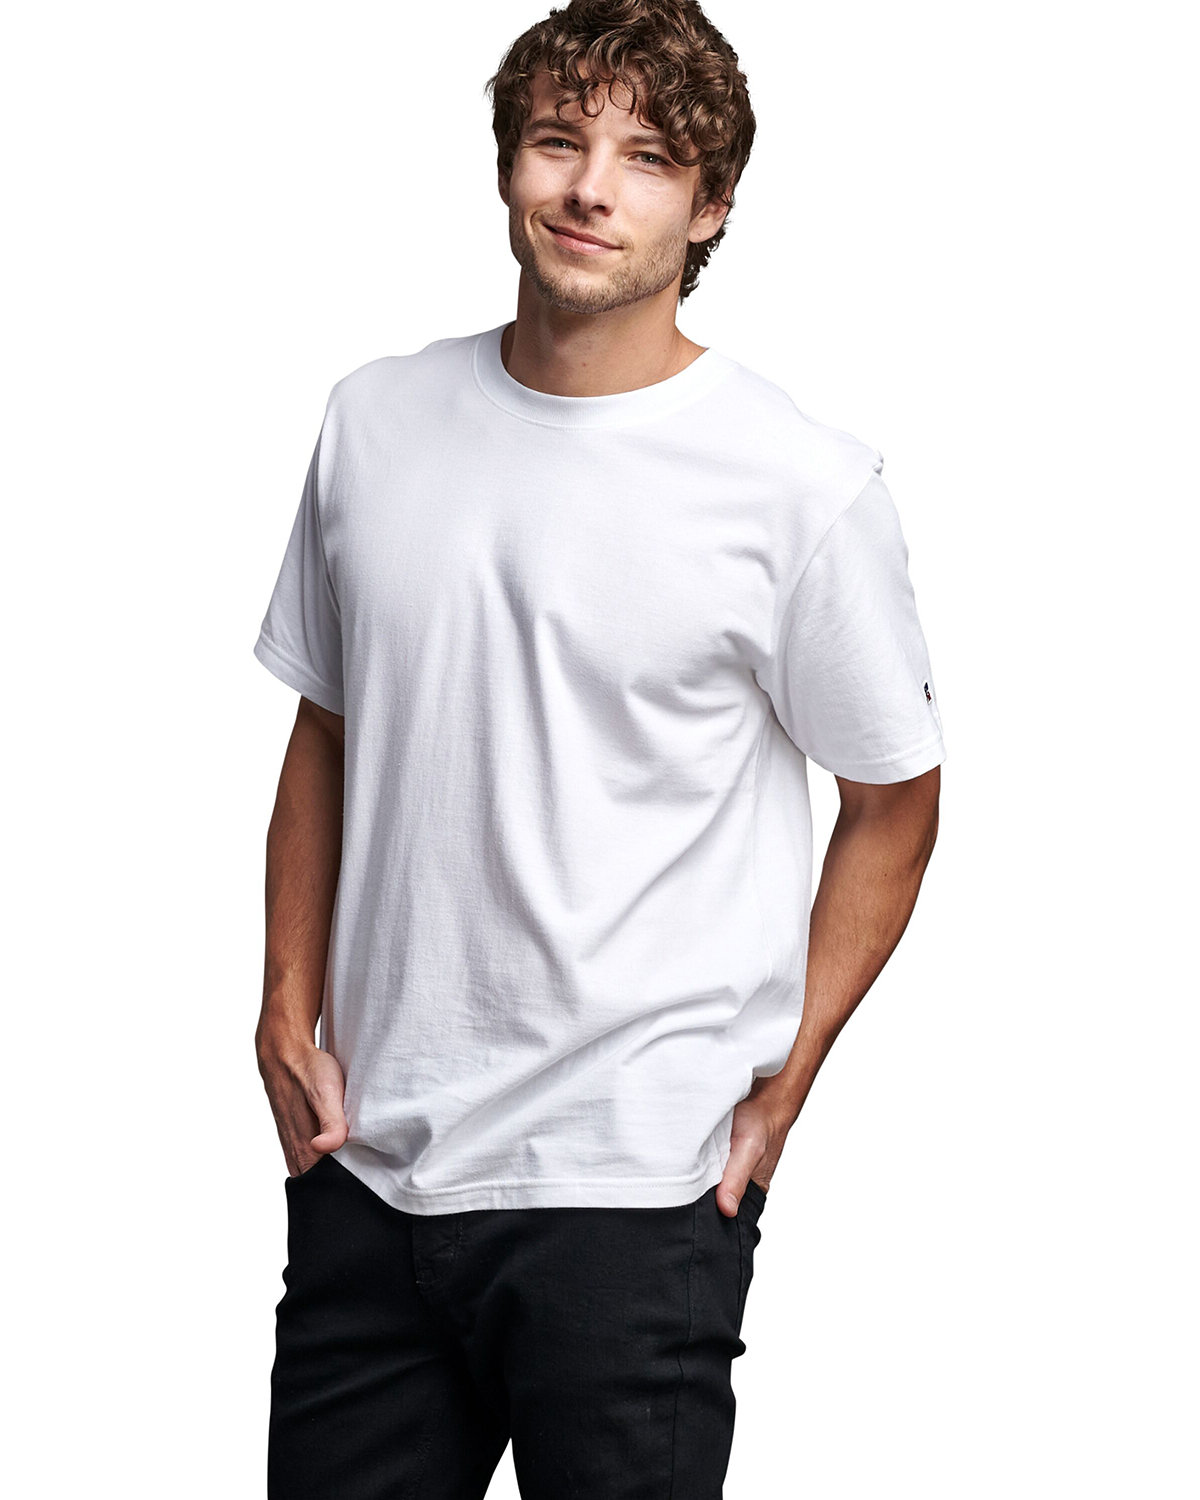 Russell Athletic Unisex Cotton Classic T-Shirt WHITE 